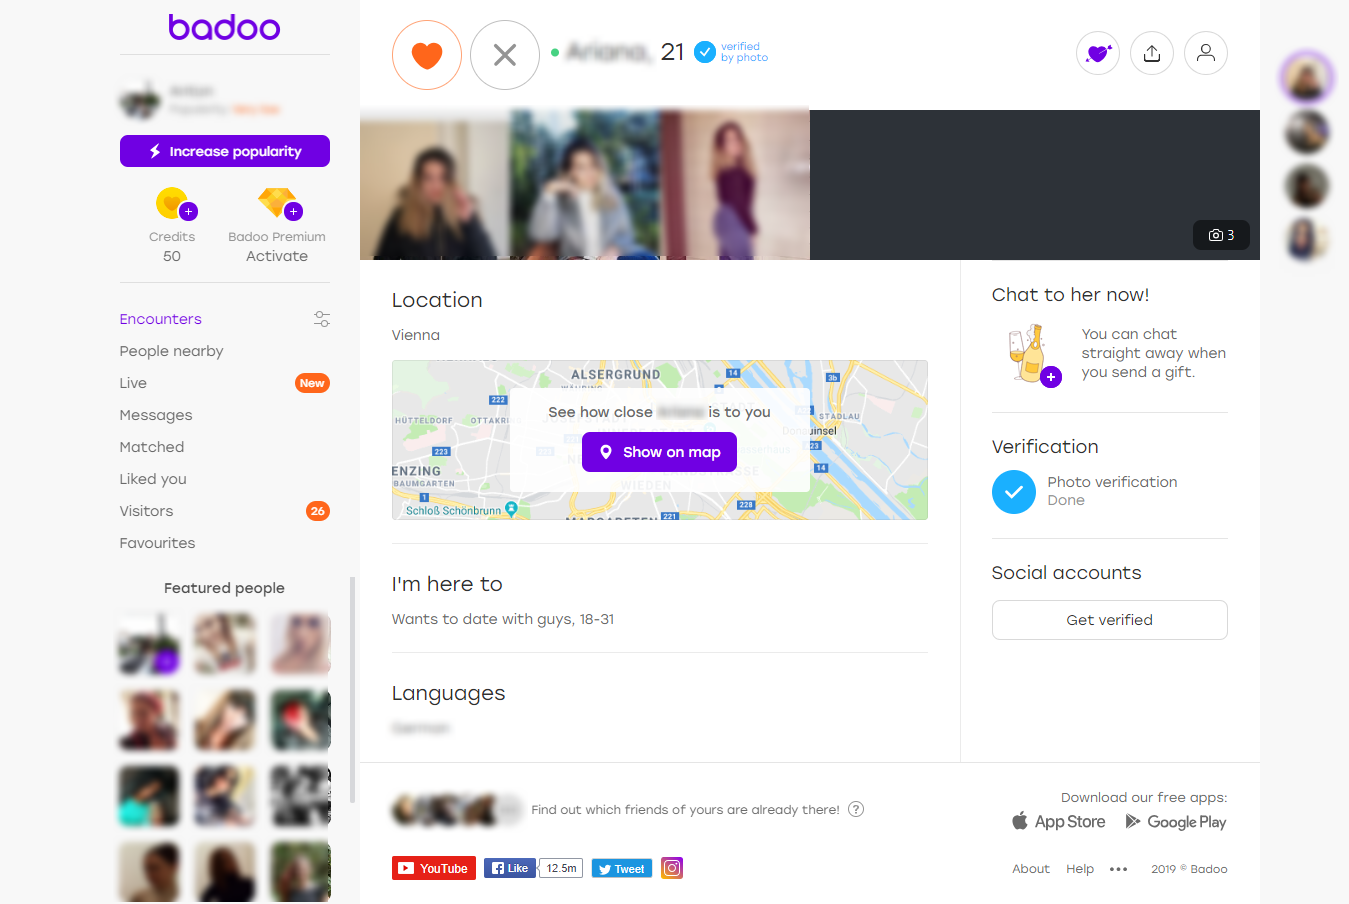 Badoo launches photo verification for safer, more efficient online dating.